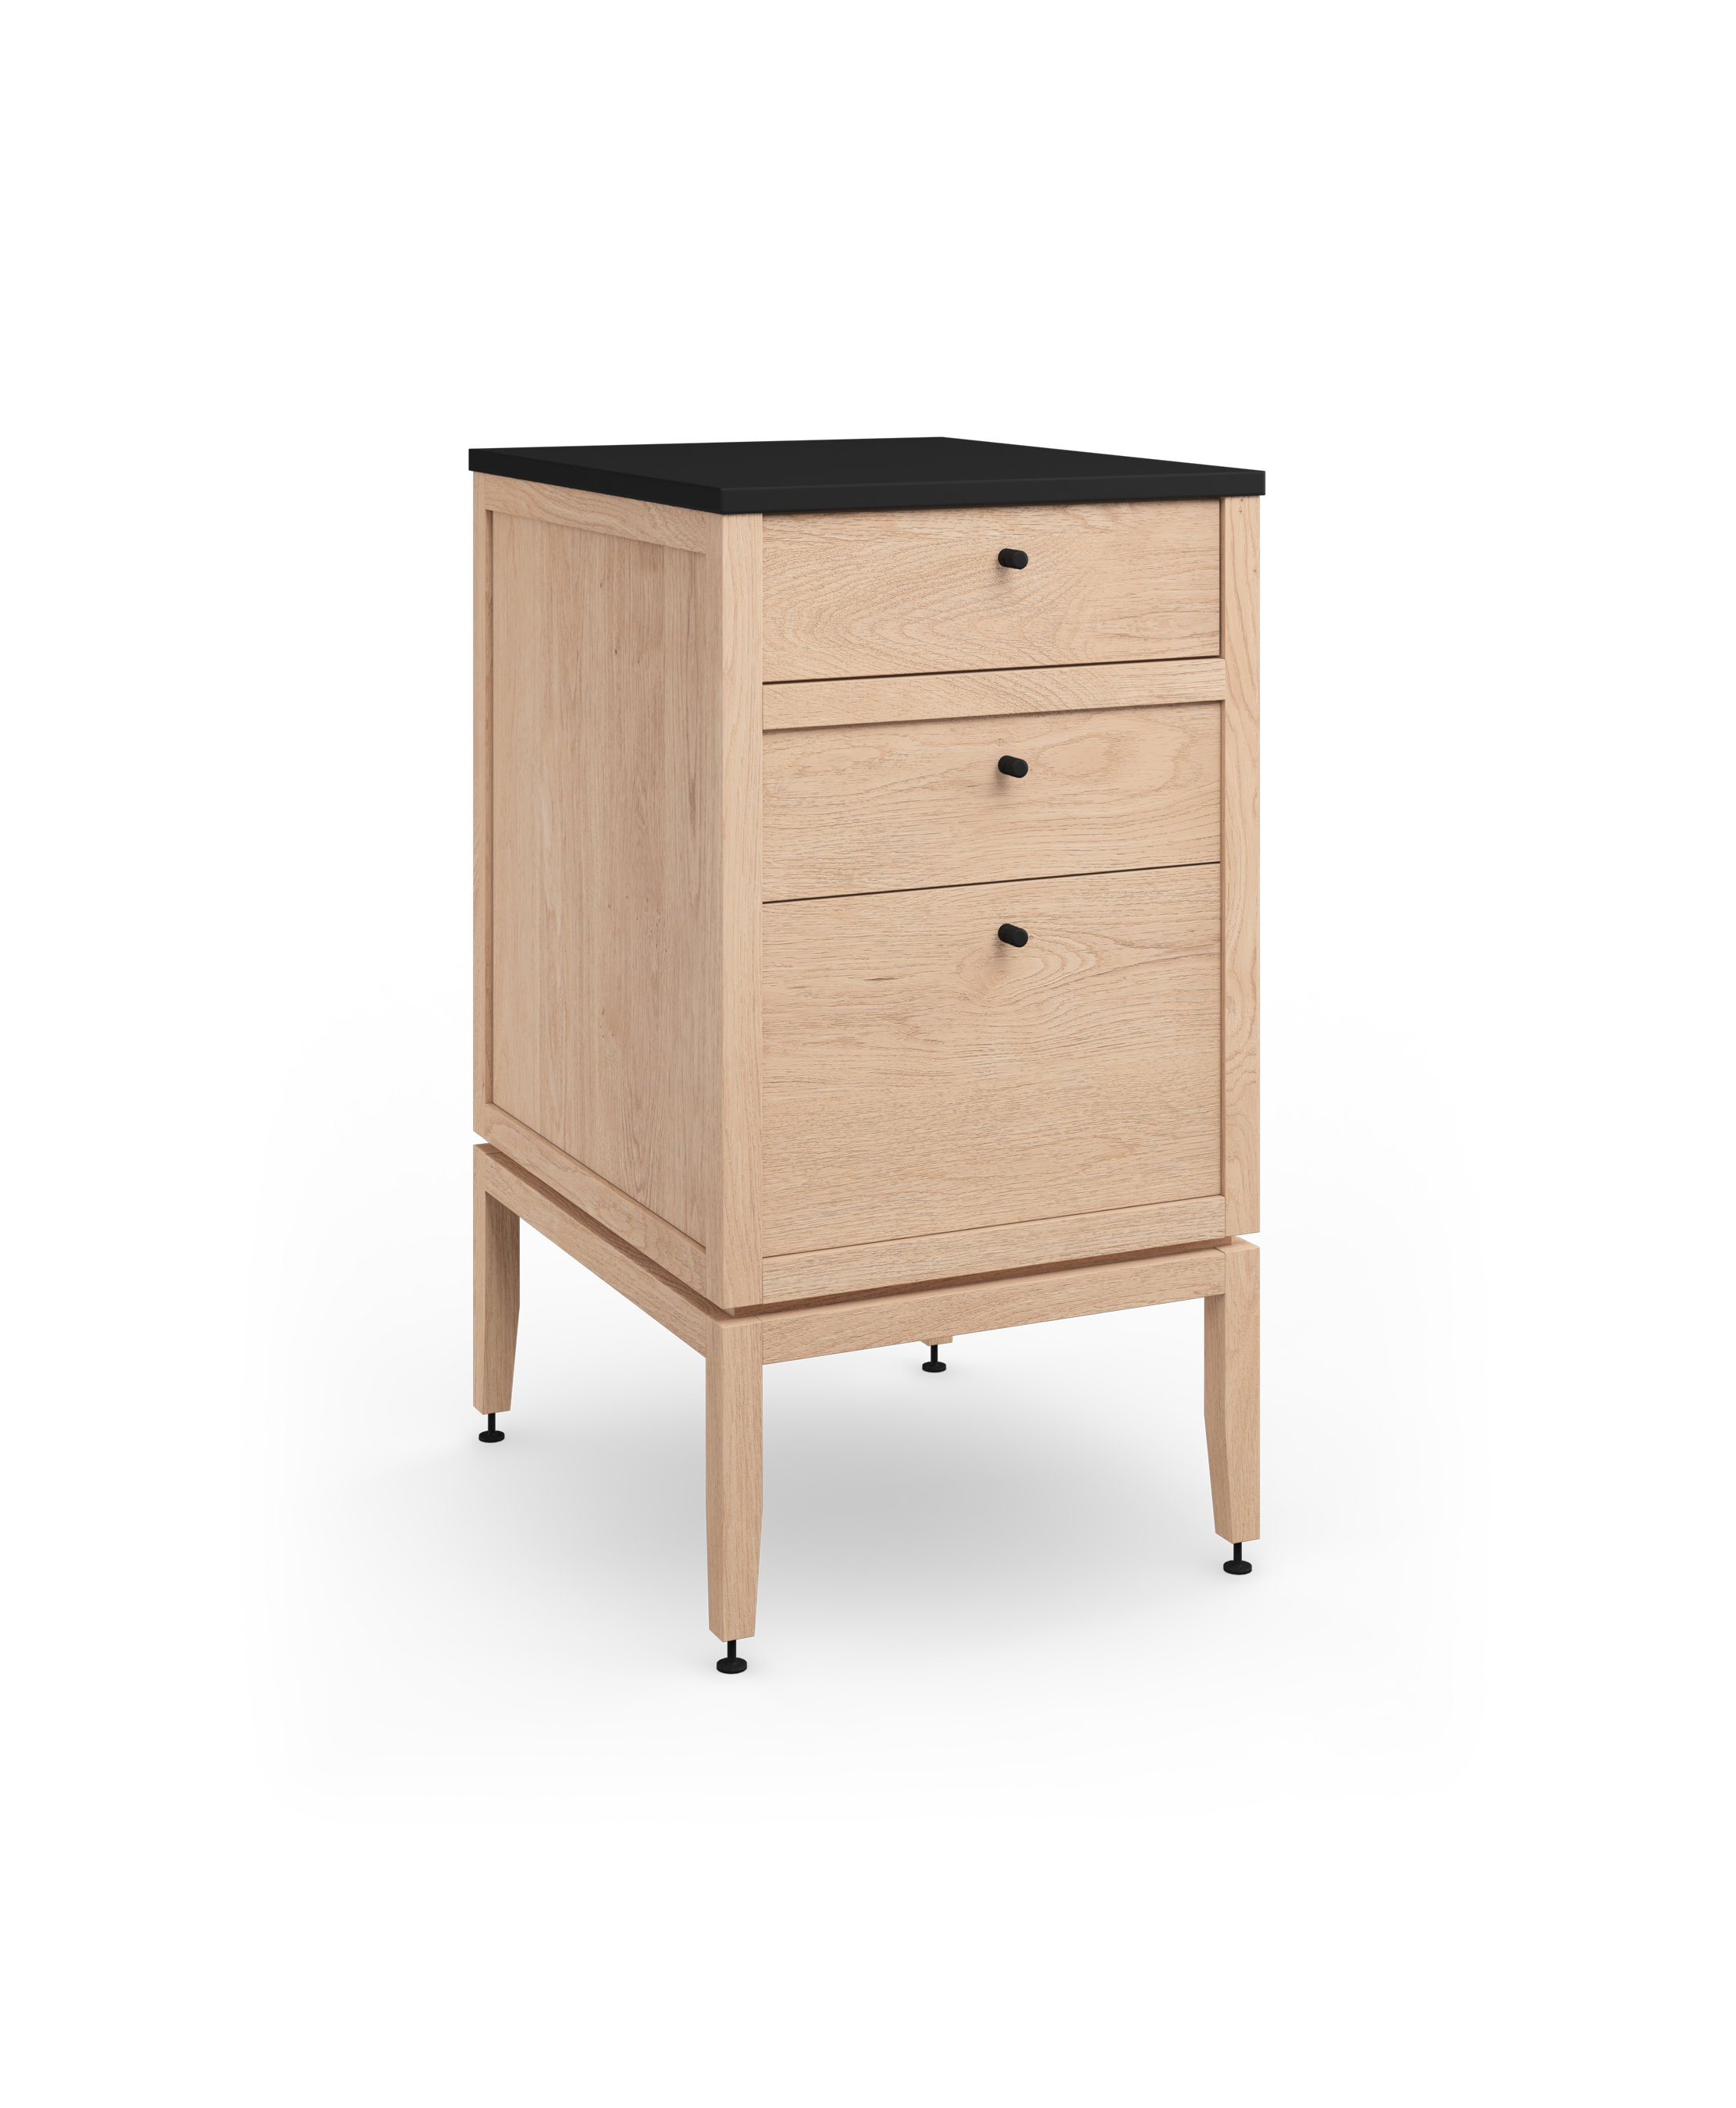 Coquo modular bathroom vanity with three drawers in natural oak. 